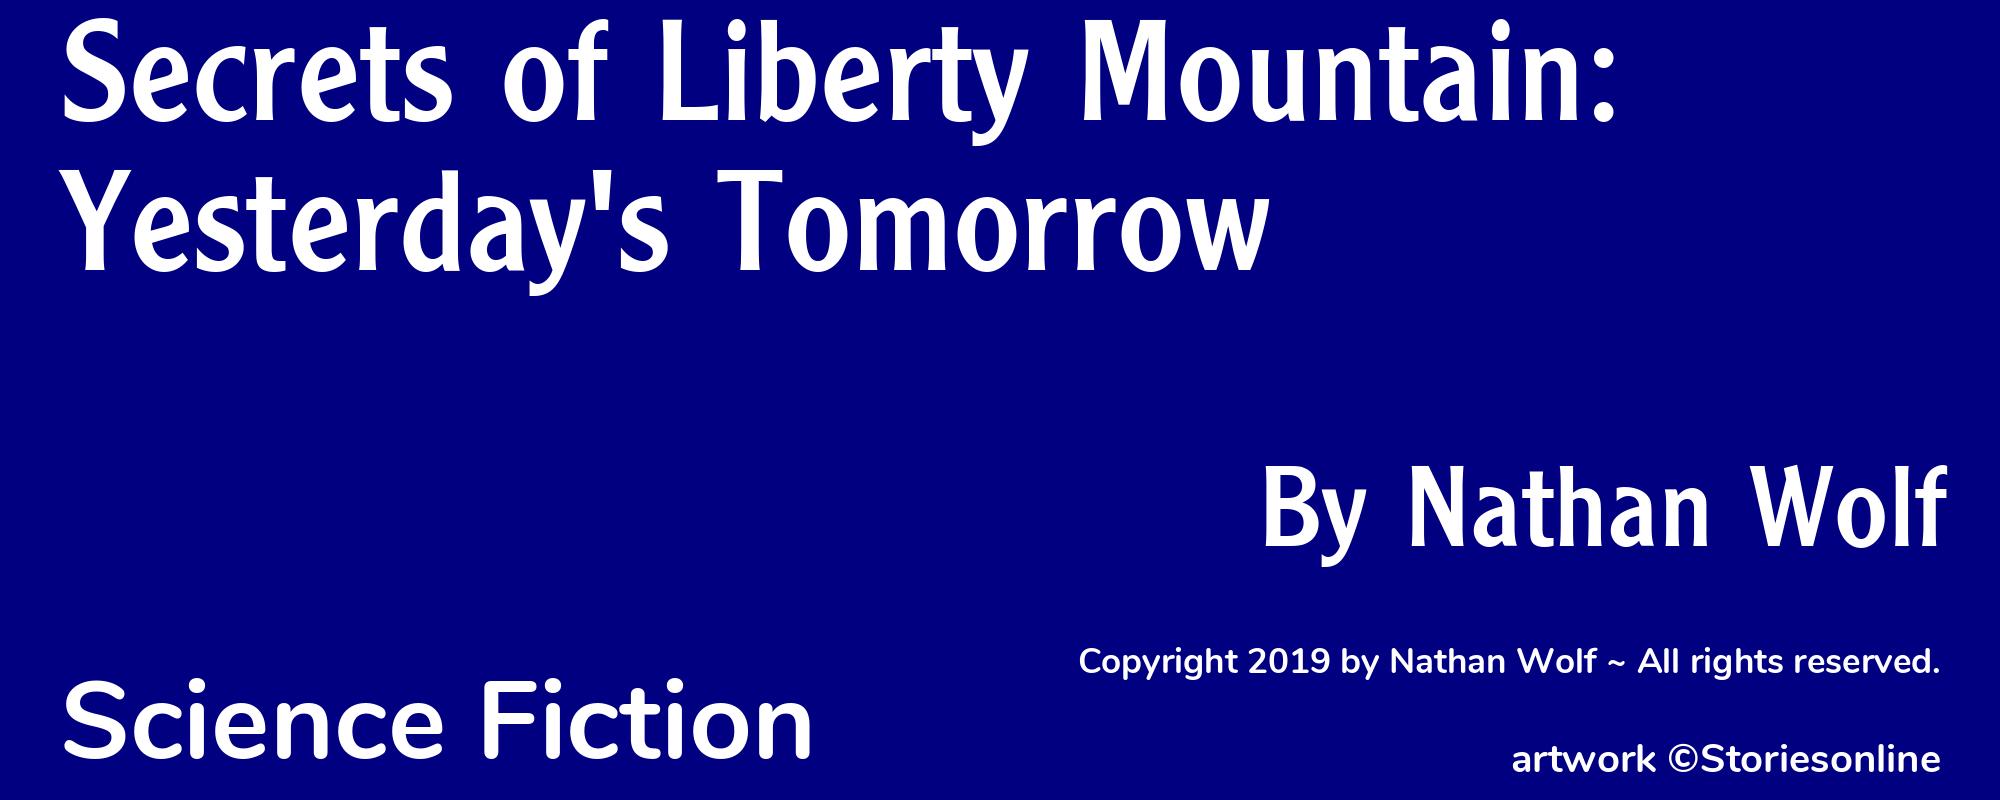 Secrets of Liberty Mountain: Yesterday's Tomorrow - Cover